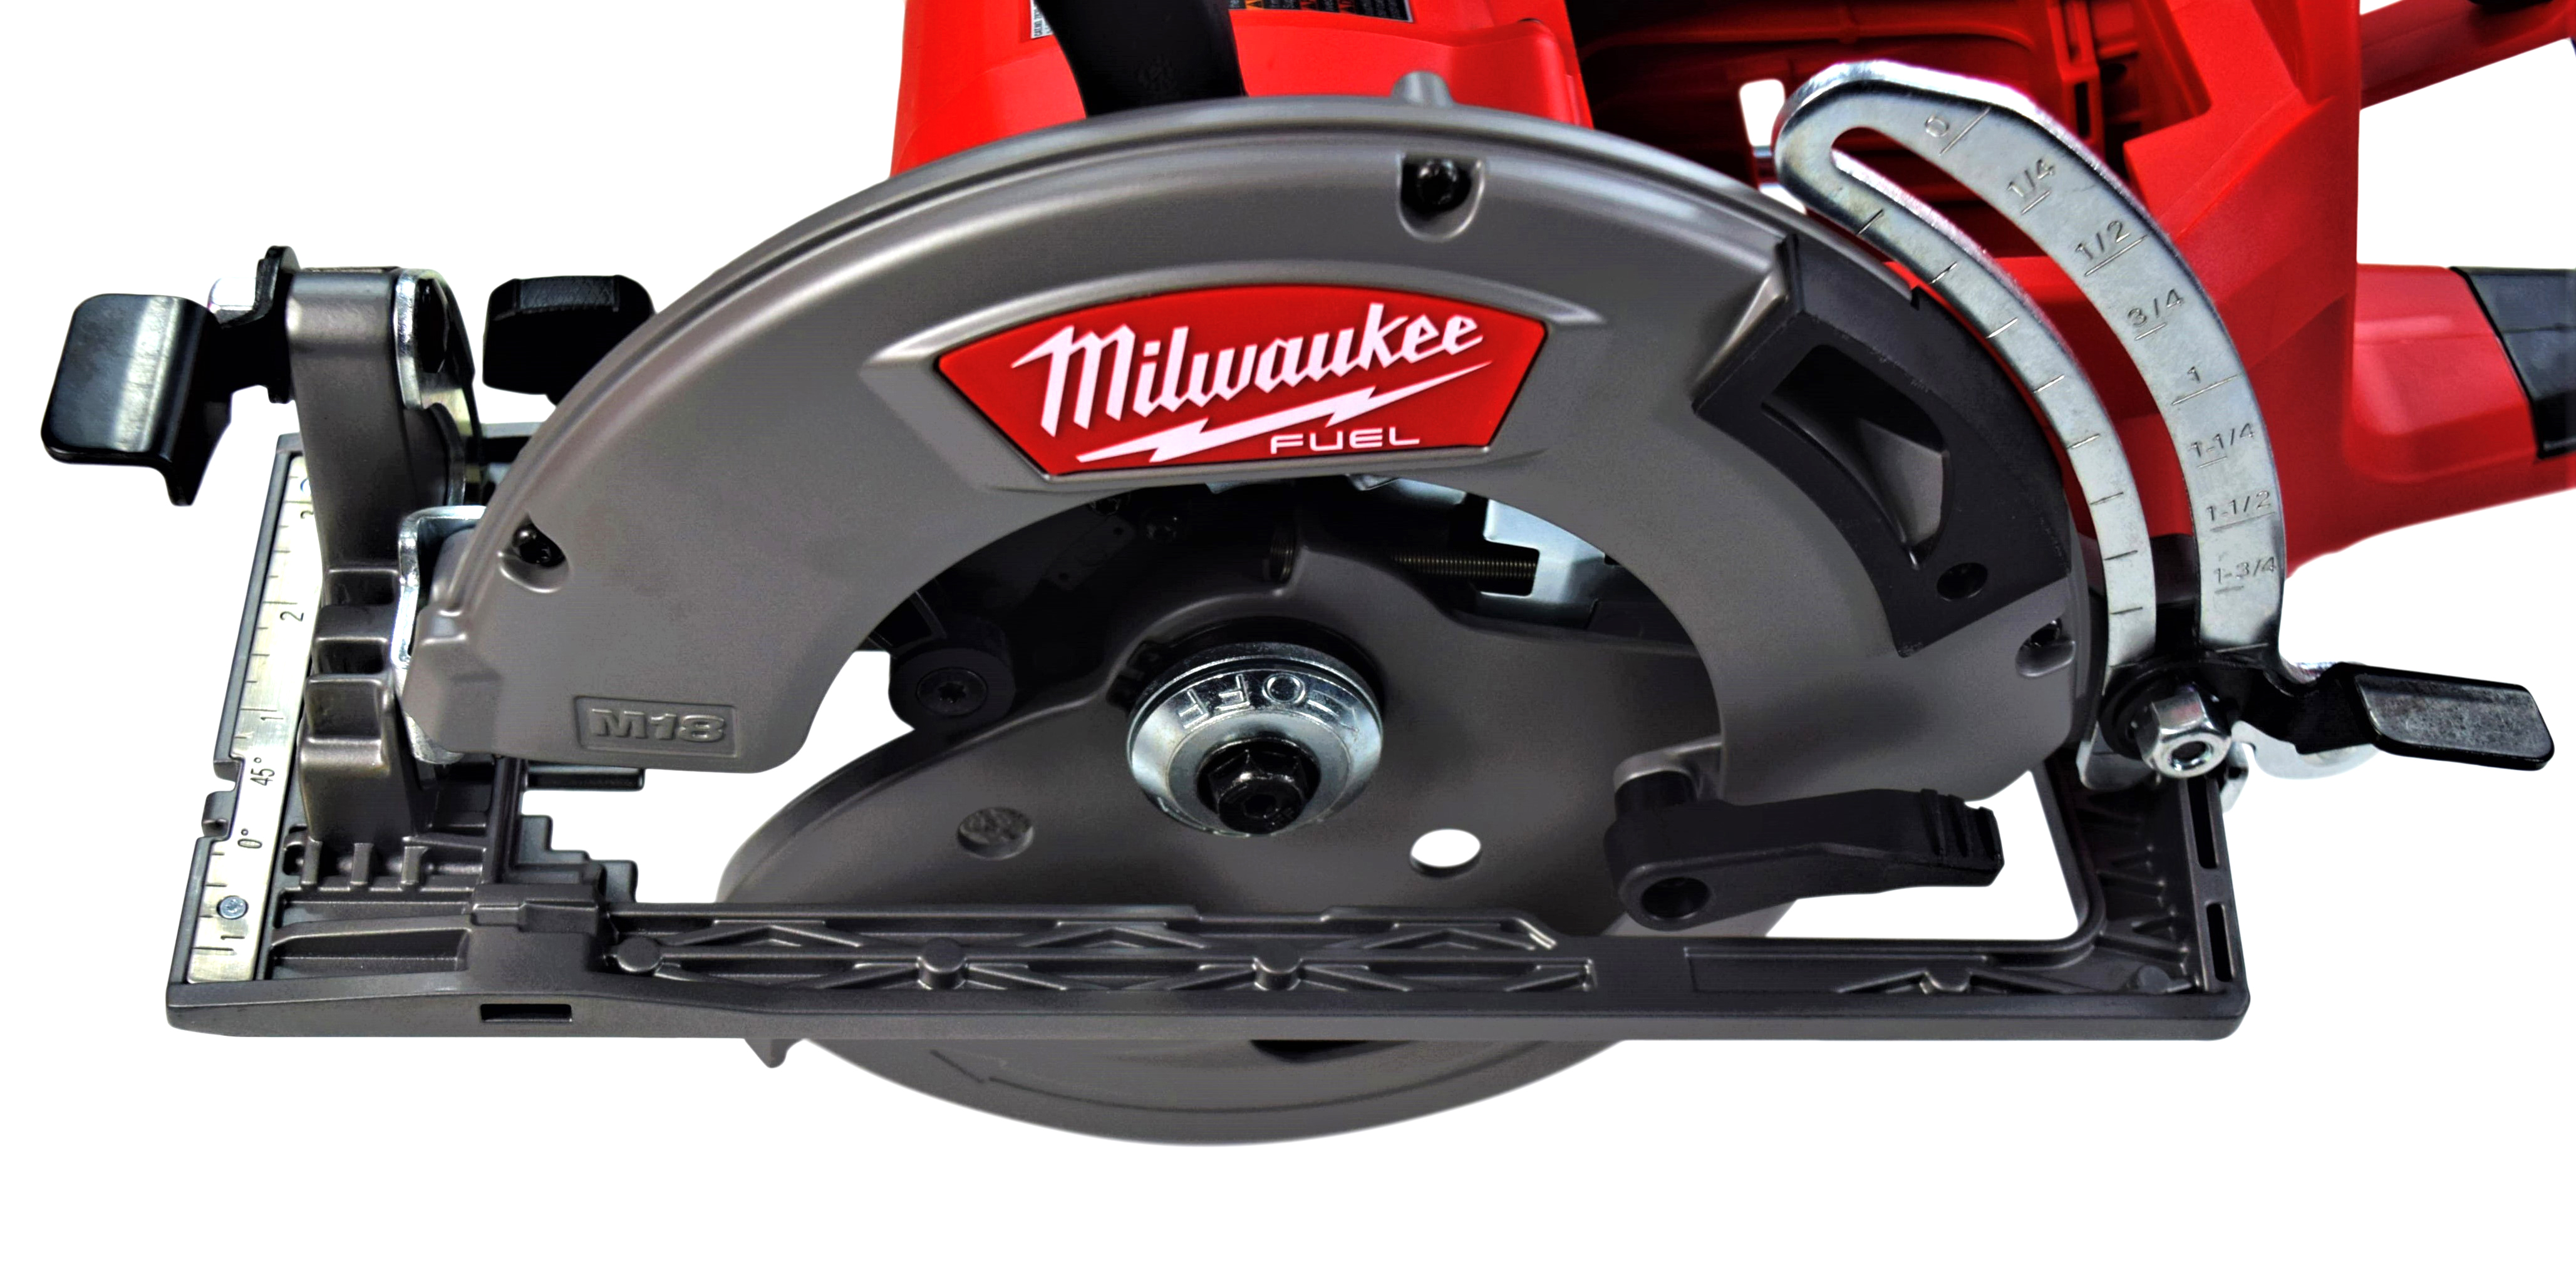 Milwaukee-2830-20 M18 FUEL Rear Handle 7-1/4 in. Circular Saw Tool Only 